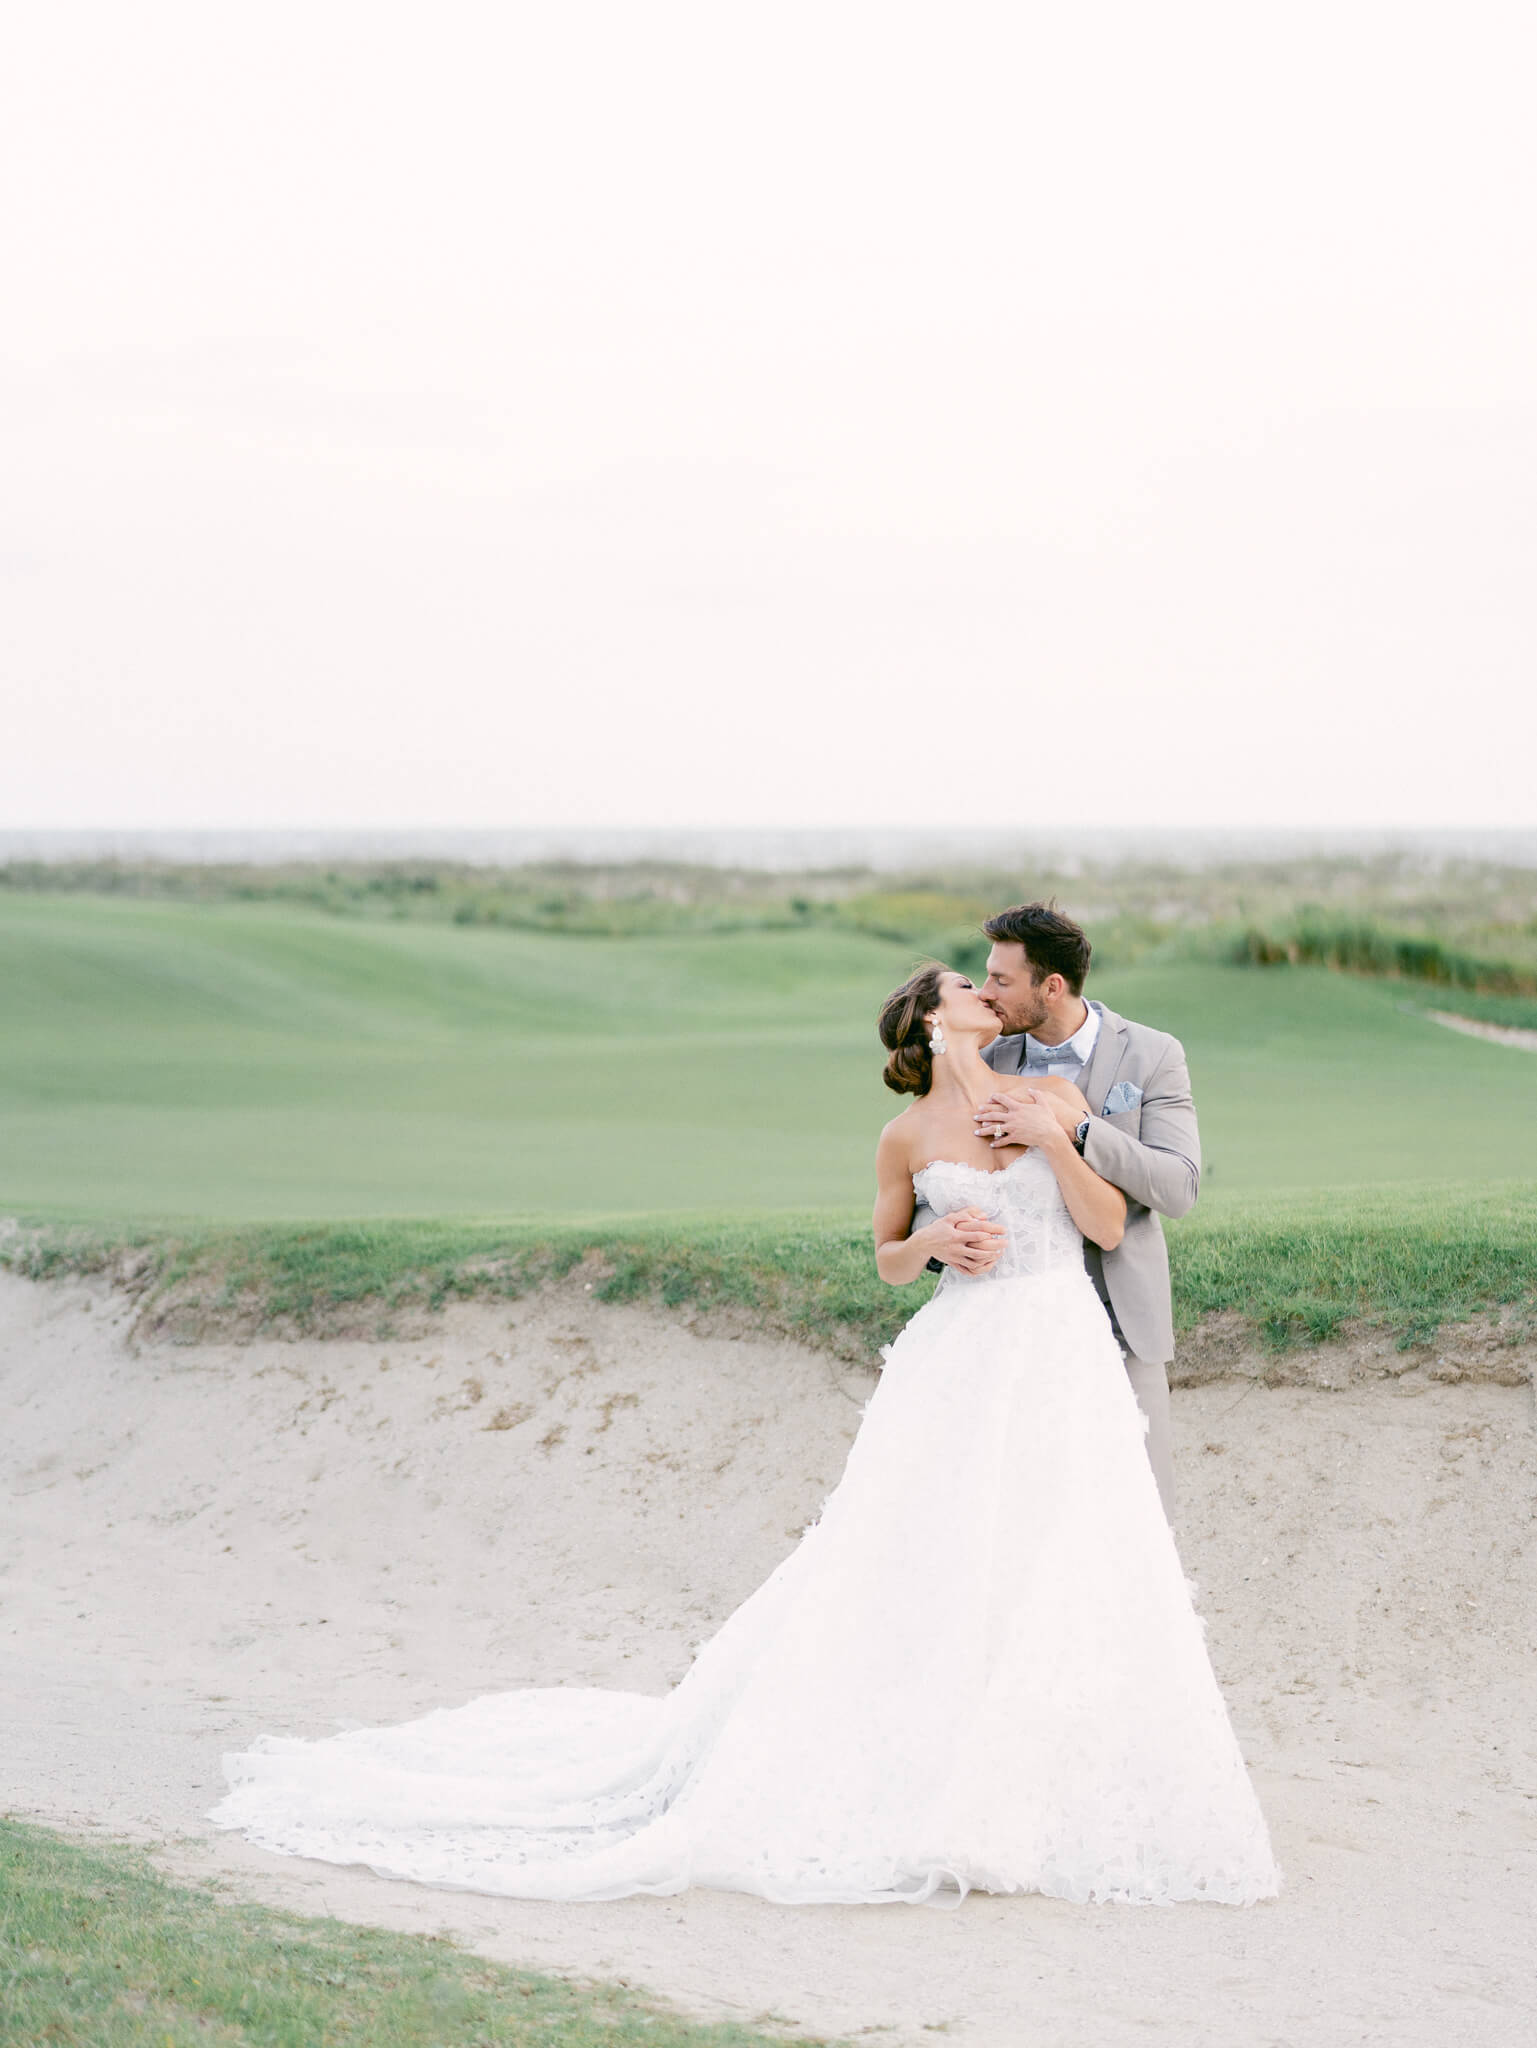 A bride and groom kissing on the Kiawah Island Ocean Course.